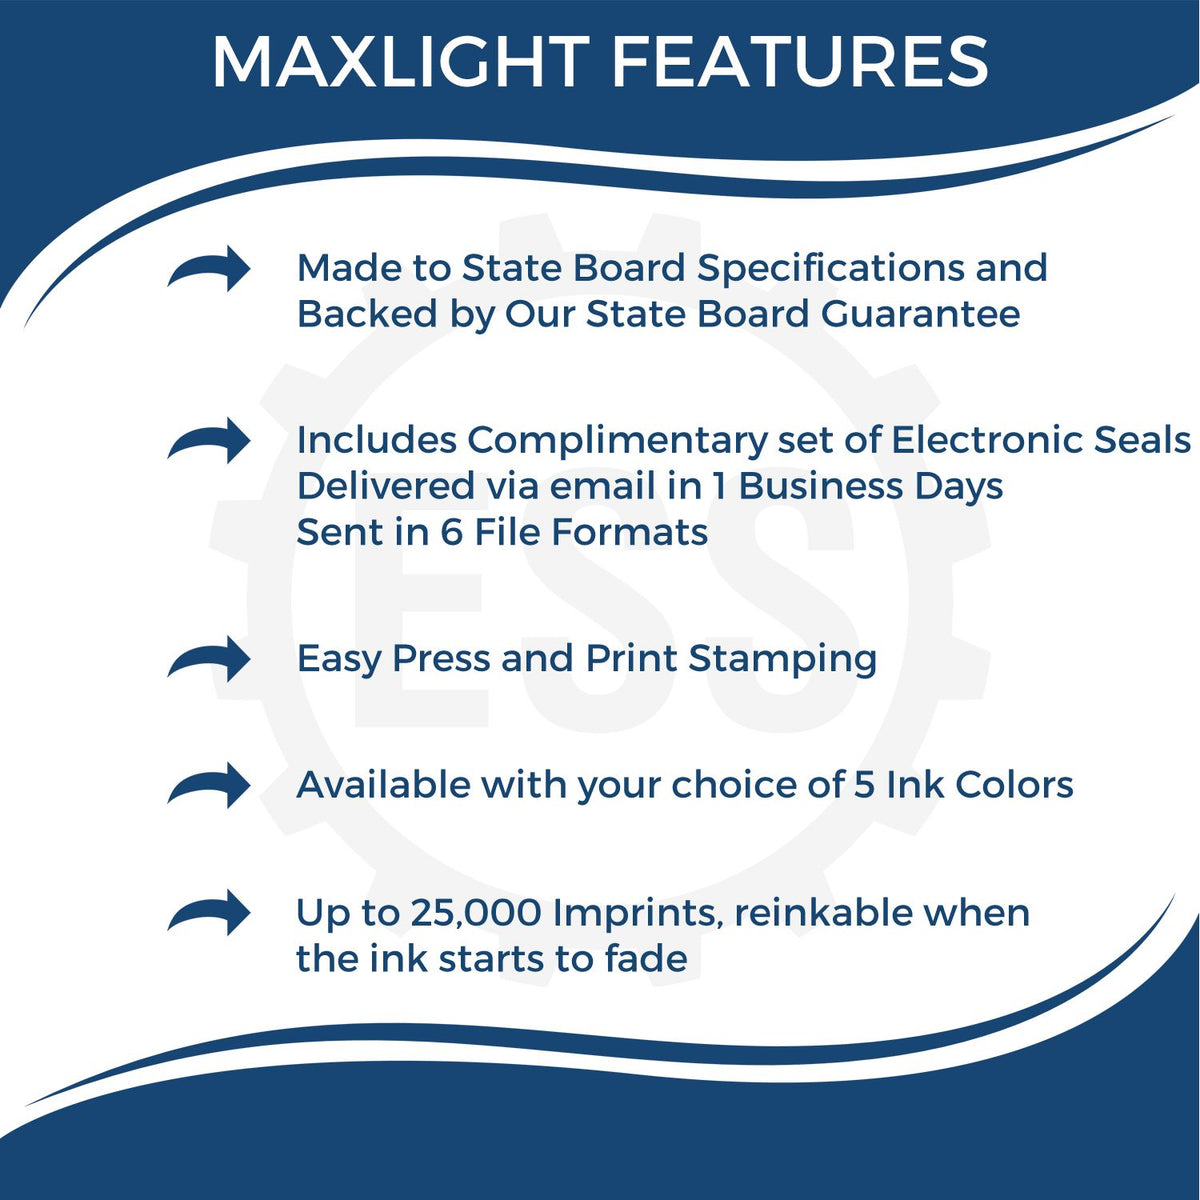 A picture of an infographic highlighting the selling points for the MaxLight Premium Pre-Inked Oklahoma State Seal Notarial Stamp